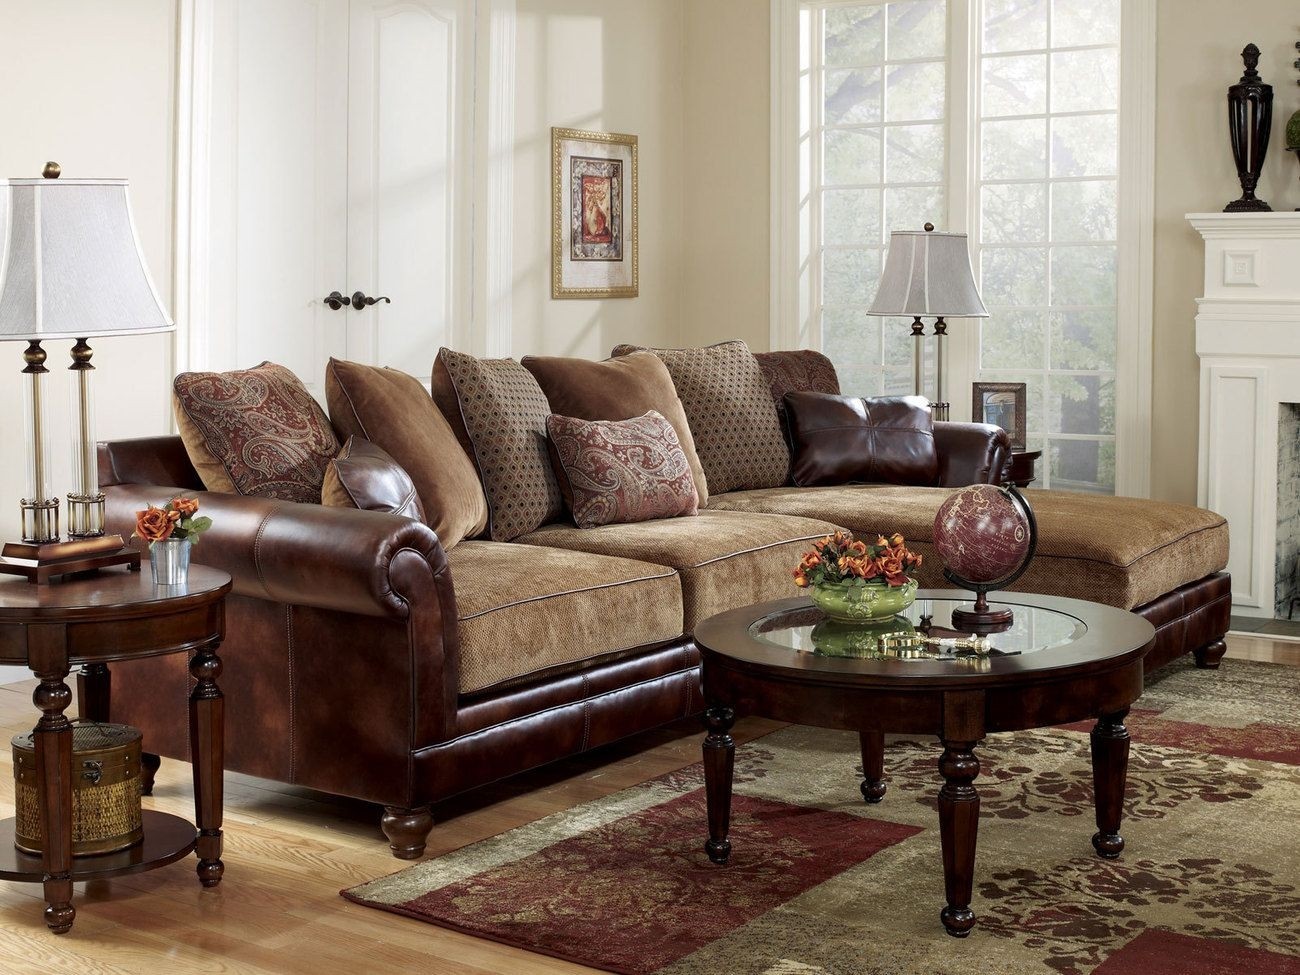 Sanders old world faux leather chenille sofa couch